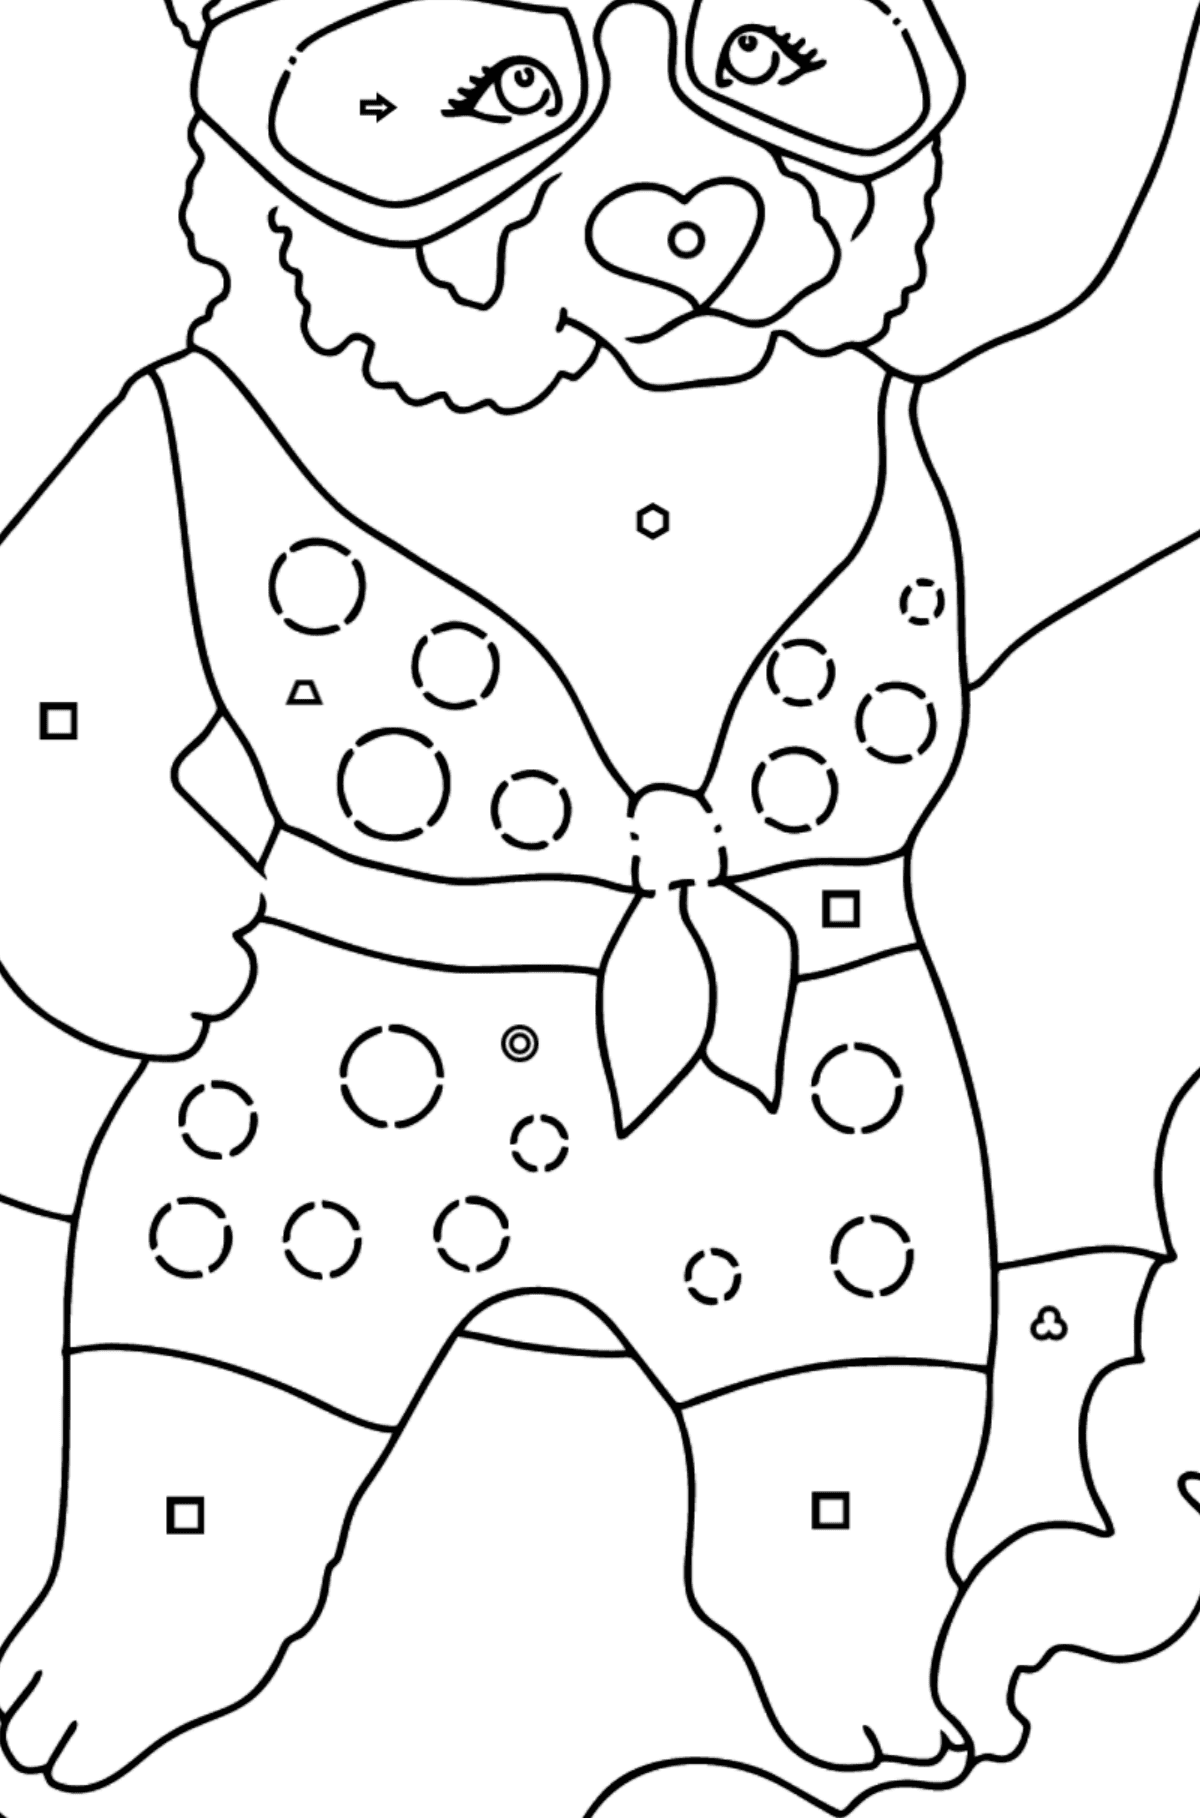 Cartoon Panda coloring page - Coloring by Geometric Shapes for Kids